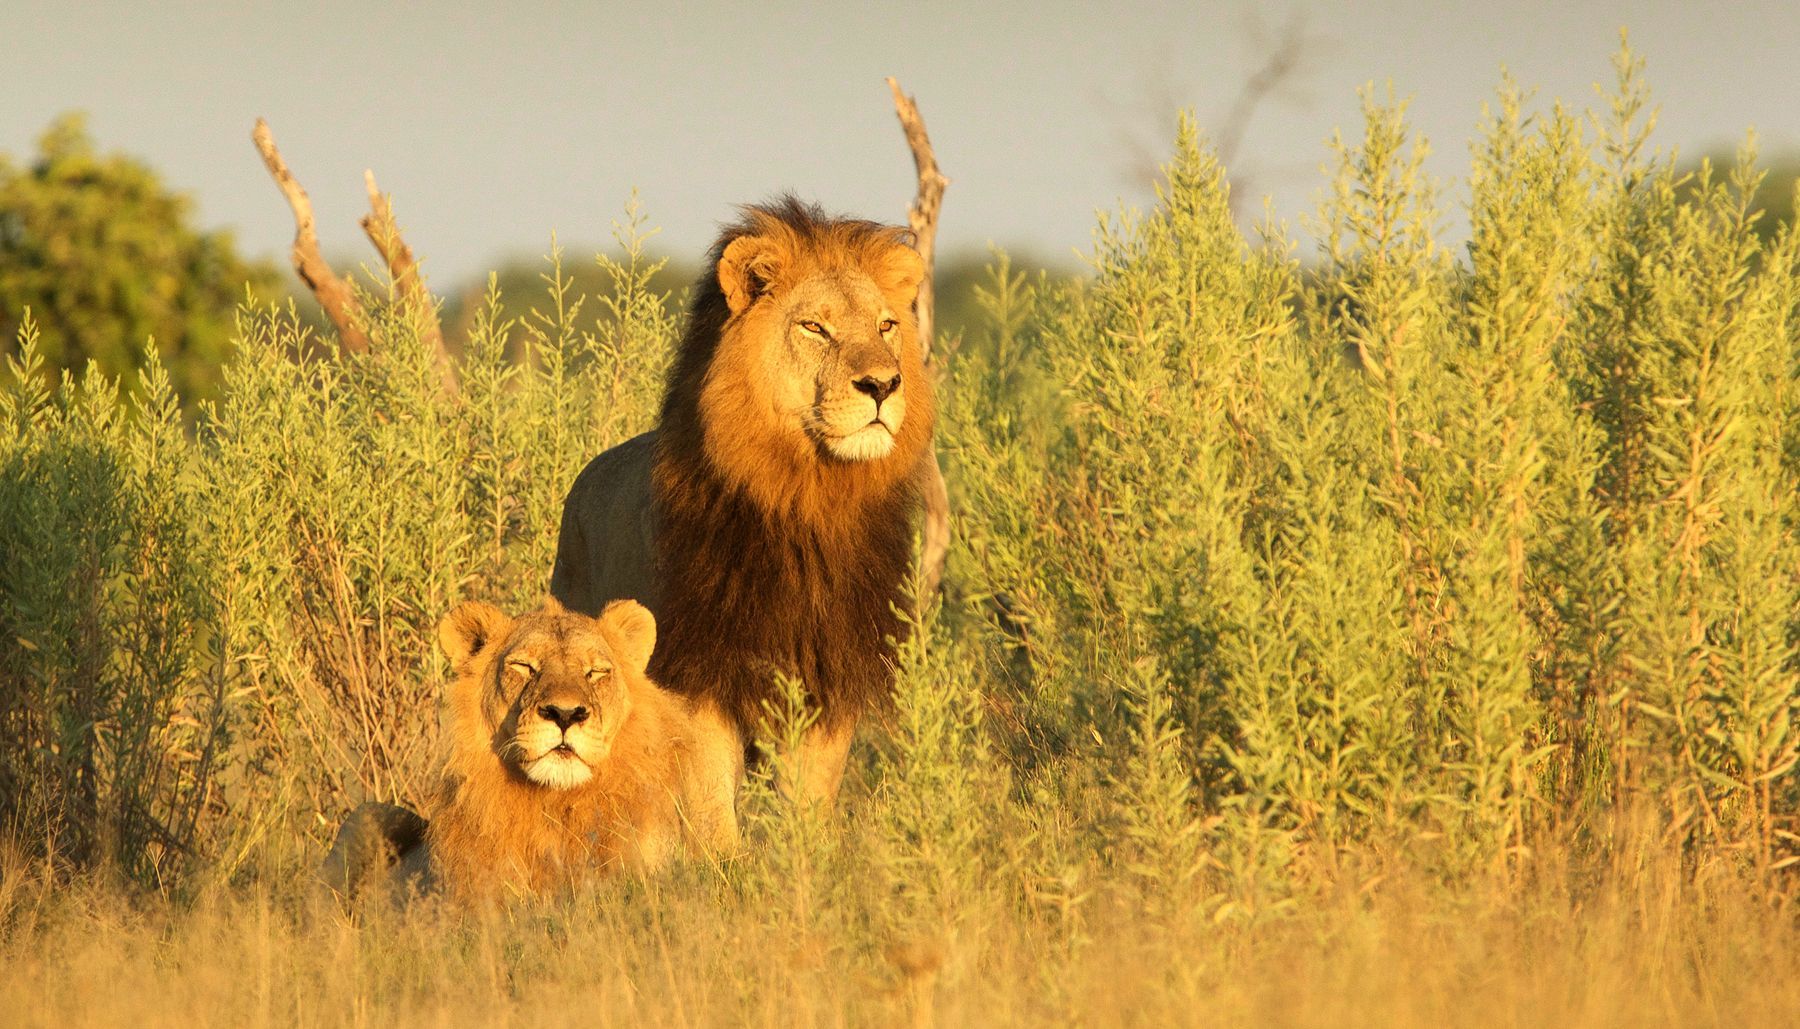 Lions are one of the most sought-after subjects during wildlife photography tours in Botswana